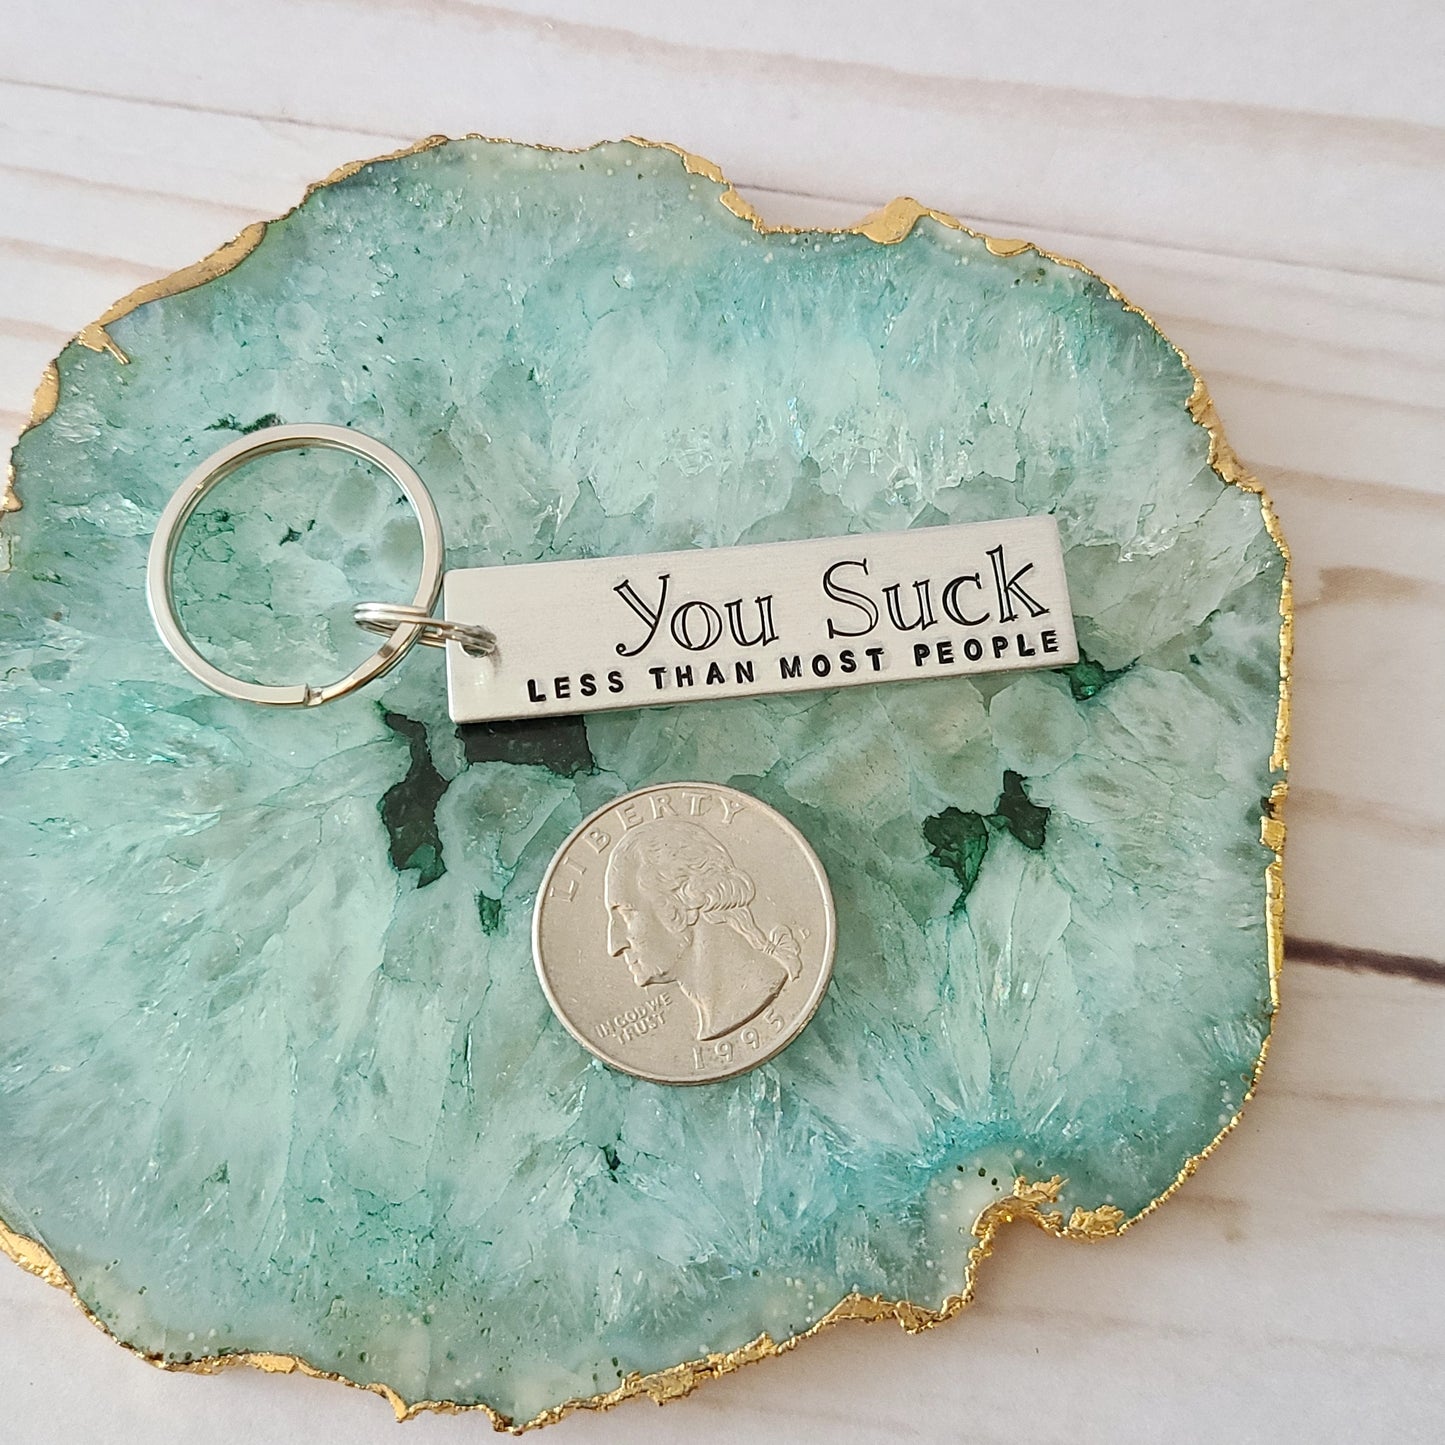 You Suck Less Than Most People Key Chain